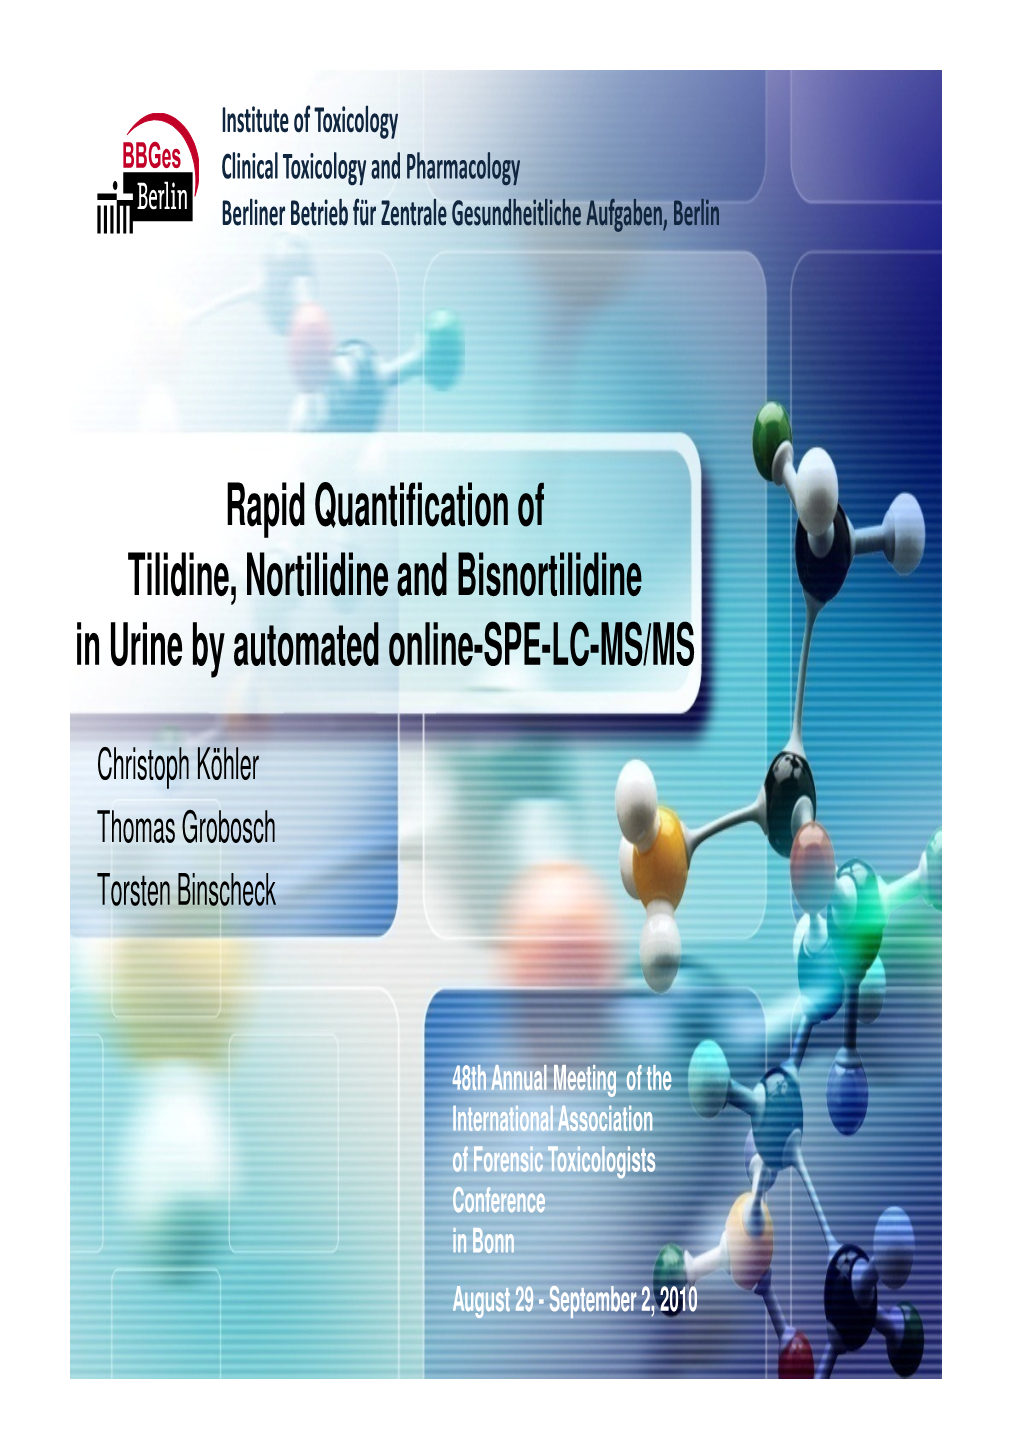 Rapid Quantification of Tilidine, Nortilidine and Bisnortilidine in Urine by Automated Online-SPE-LC-MS/MS